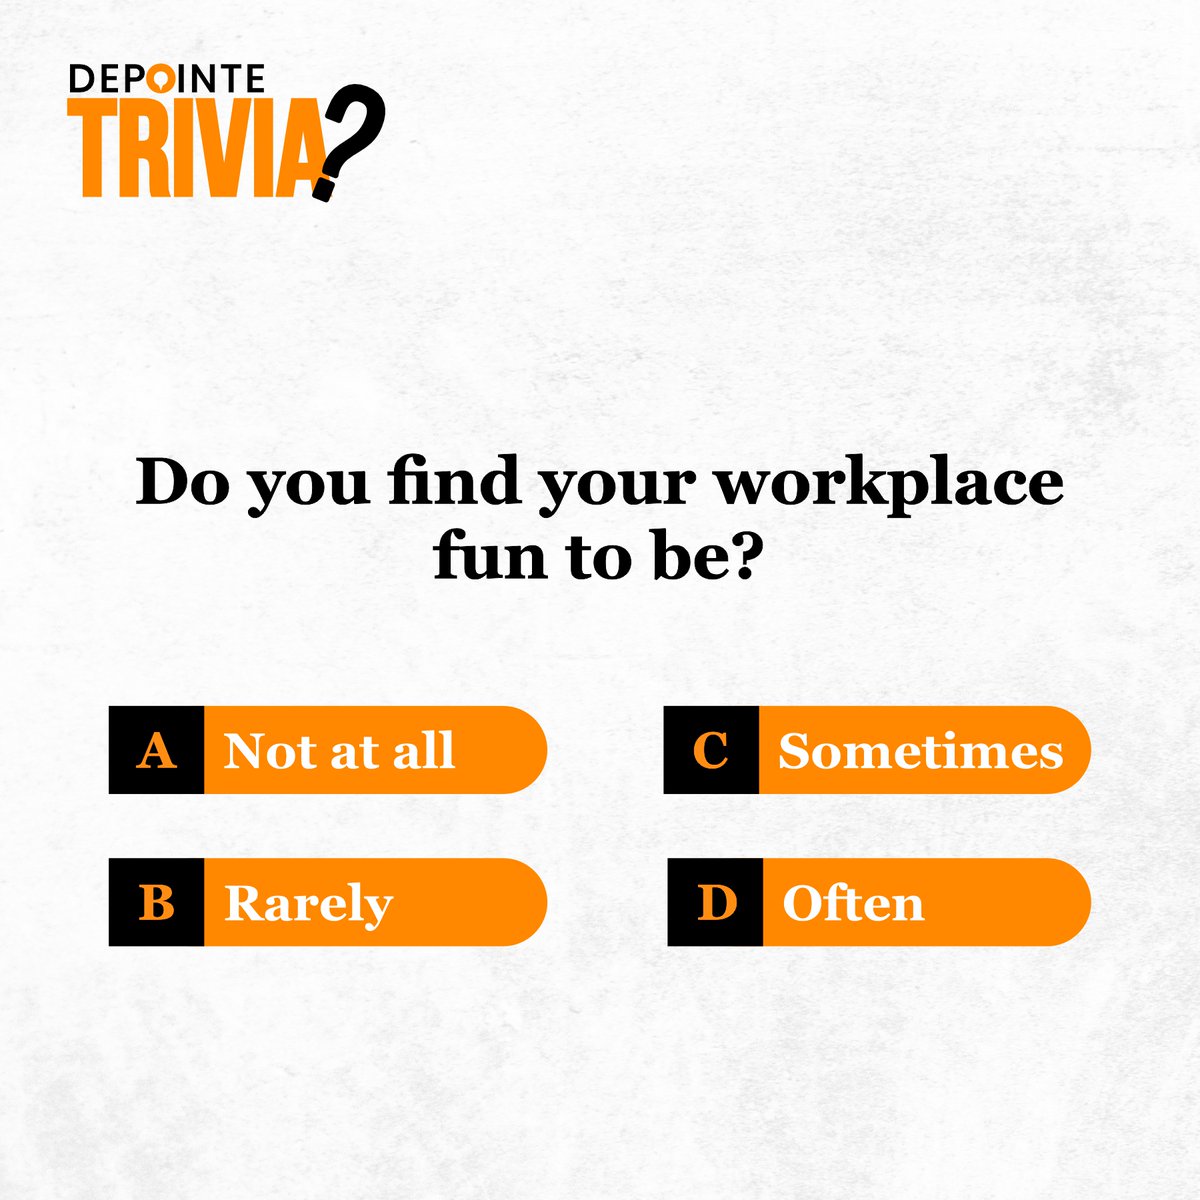 Kindly indicate your response in the comment section.

#depointe #trivia #tgif #humancapitalmanagement